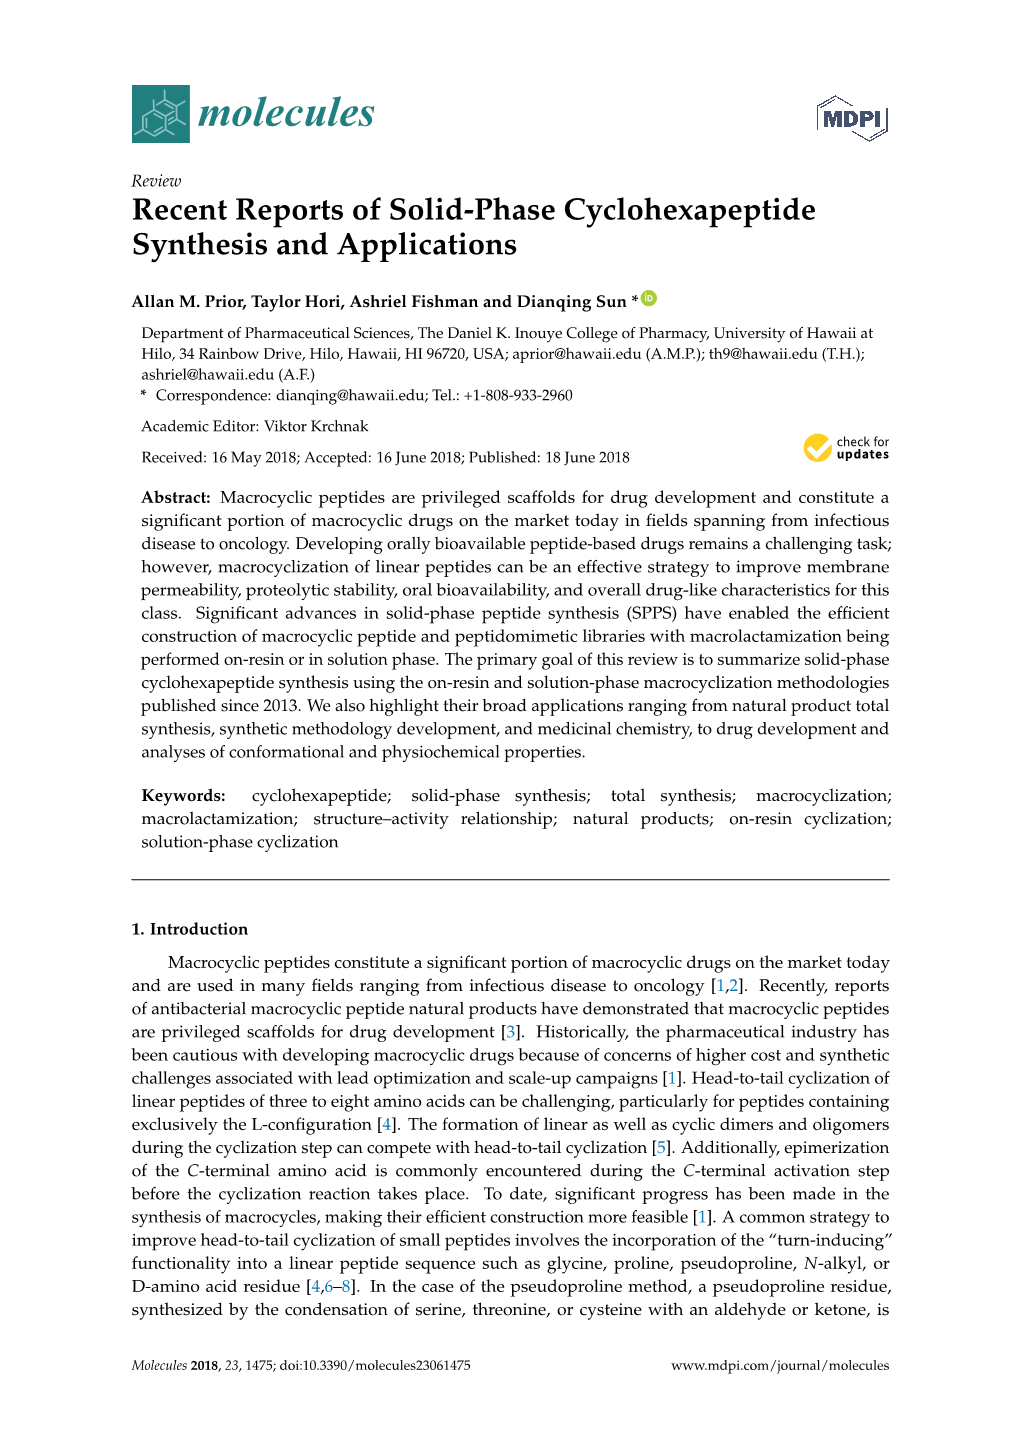 Recent Reports of Solid-Phase Cyclohexapeptide Synthesis and Applications